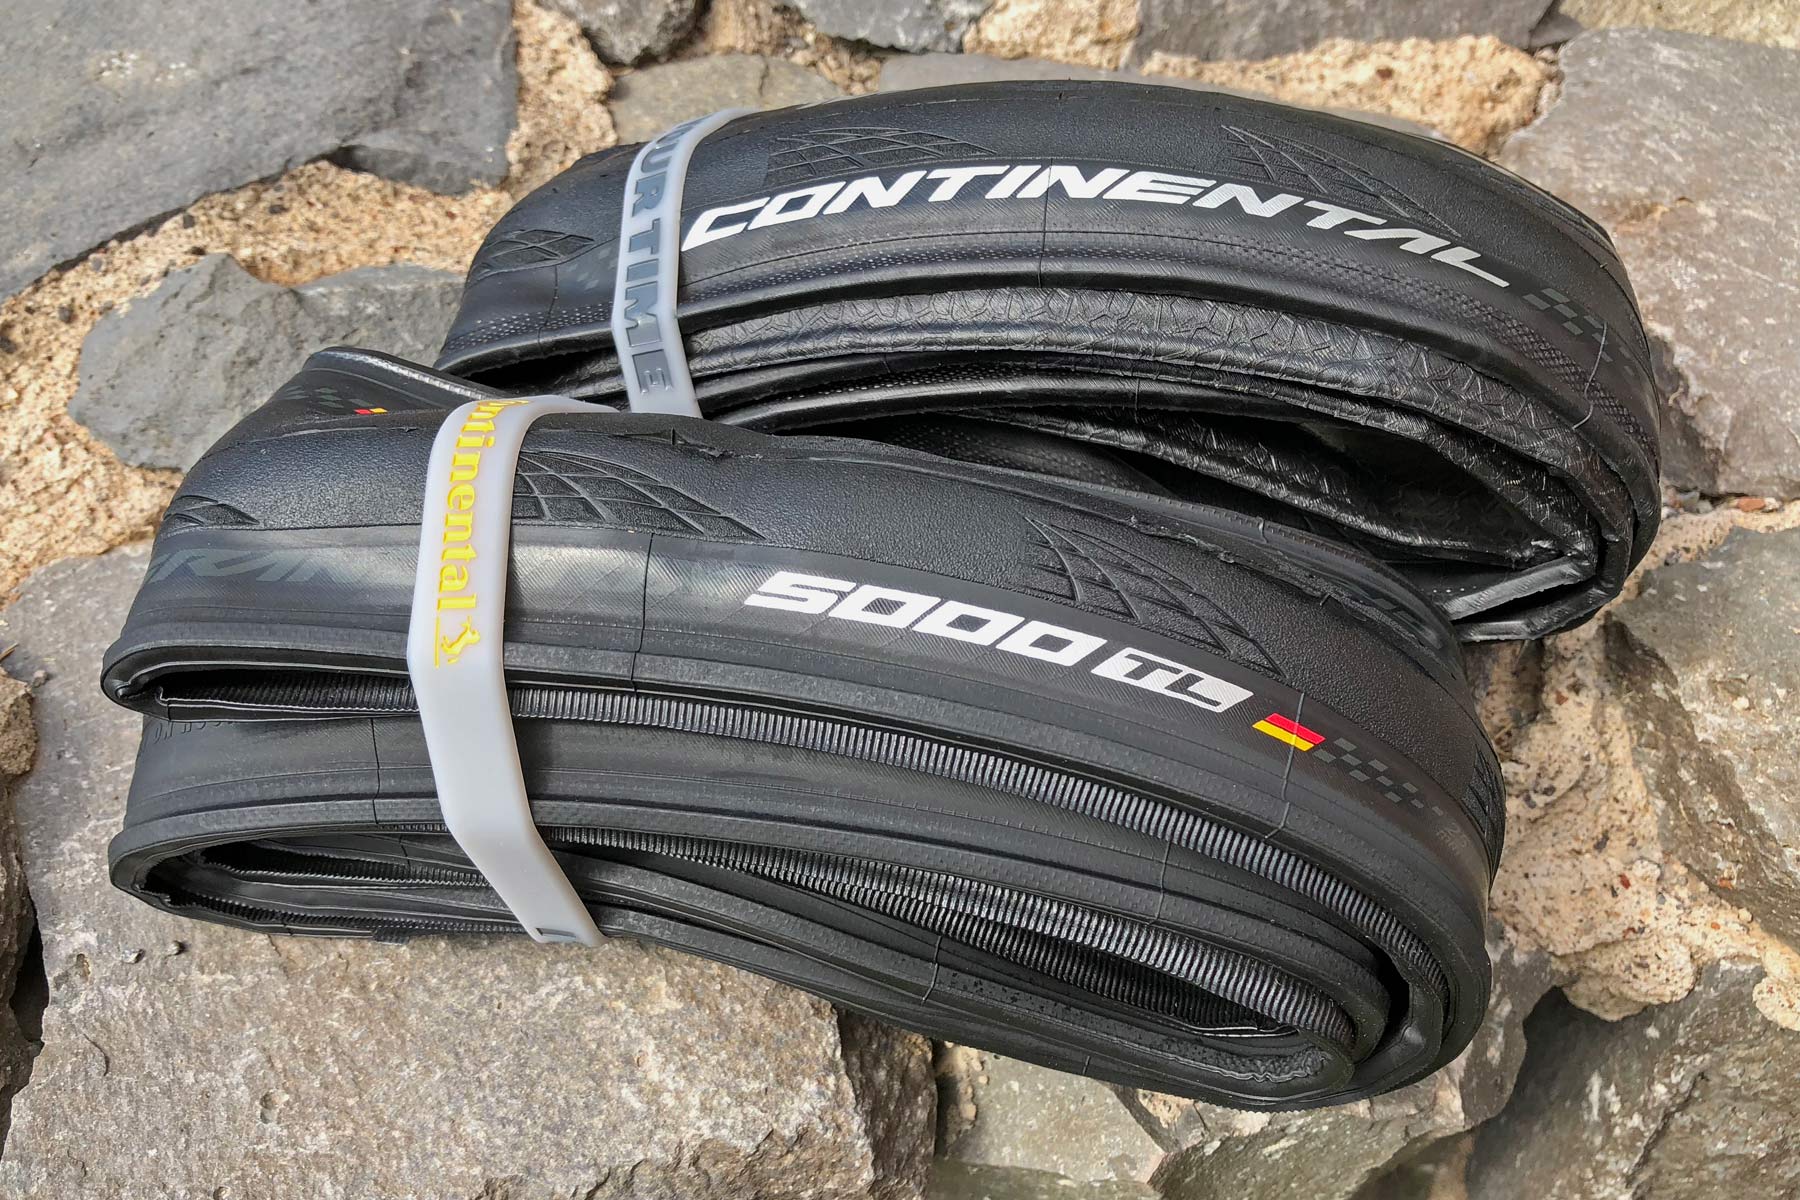 Continental GP 5000 TL tubeless road tire, a fully tubeless modern remaking of the industry benchmark road tire